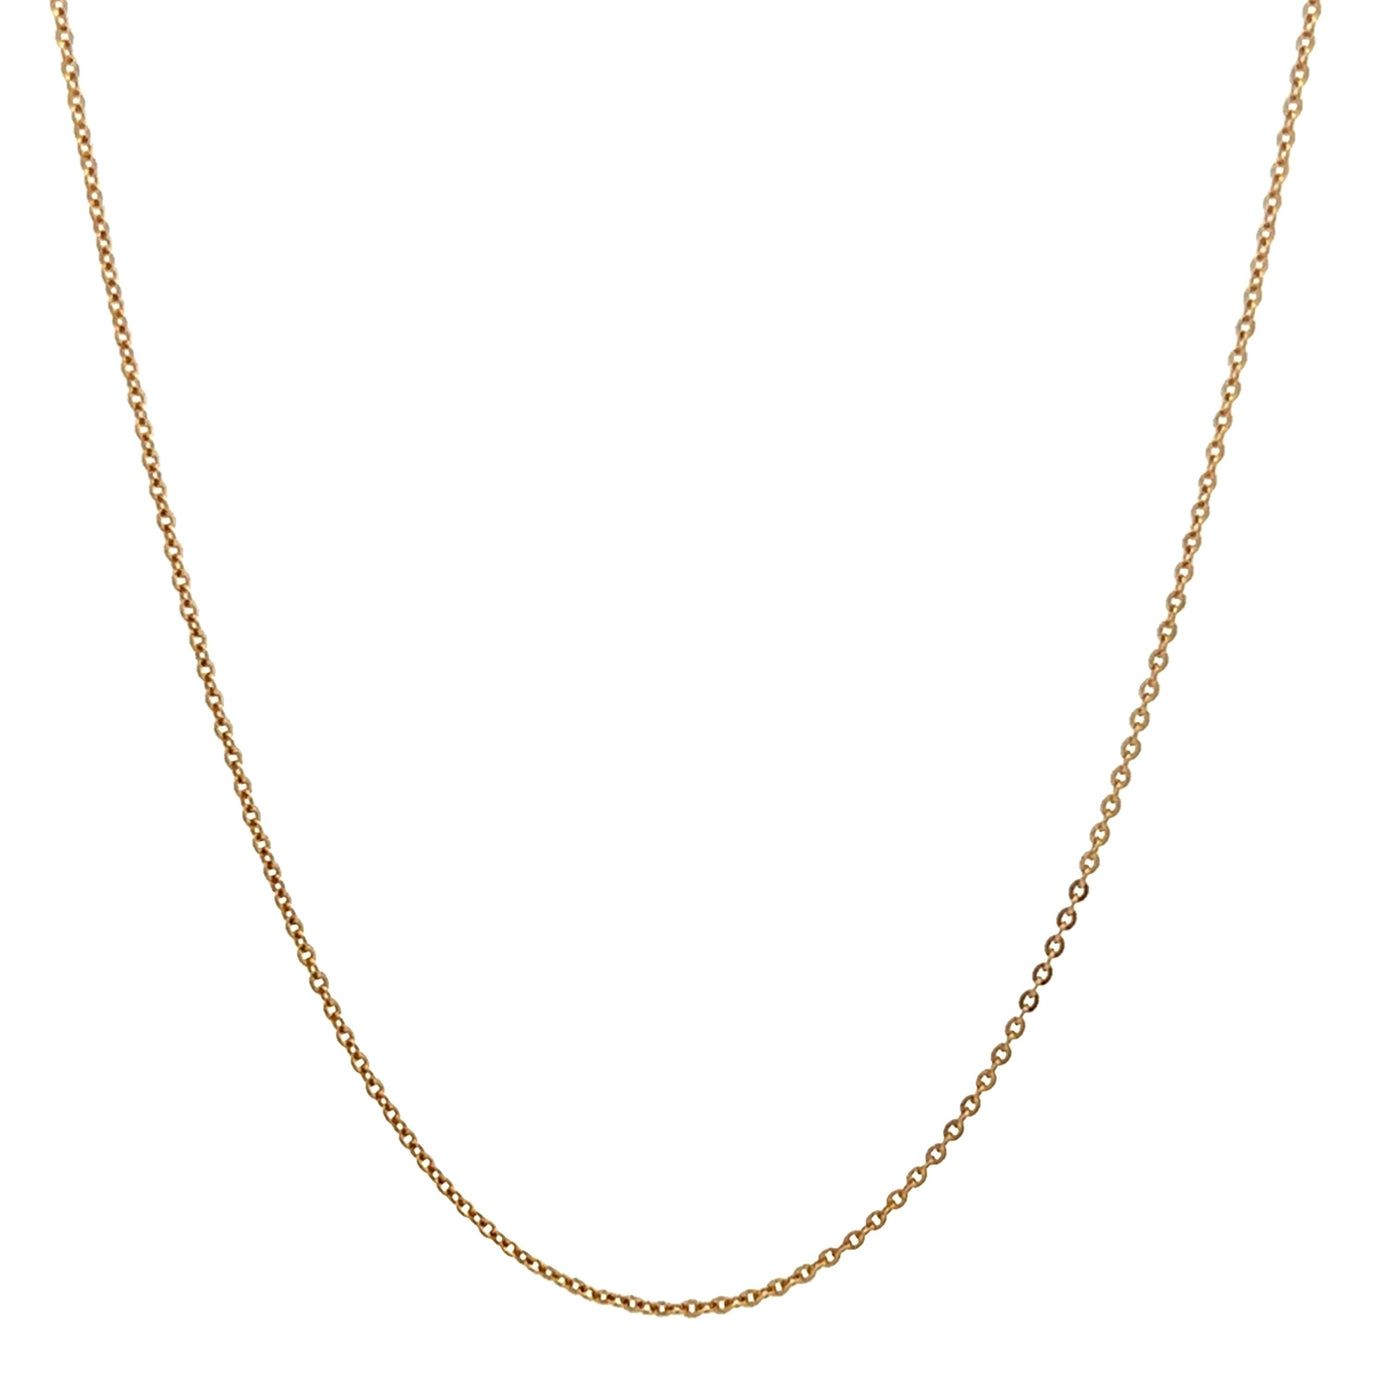 14K Gold Filled, 1mm Cable Chain